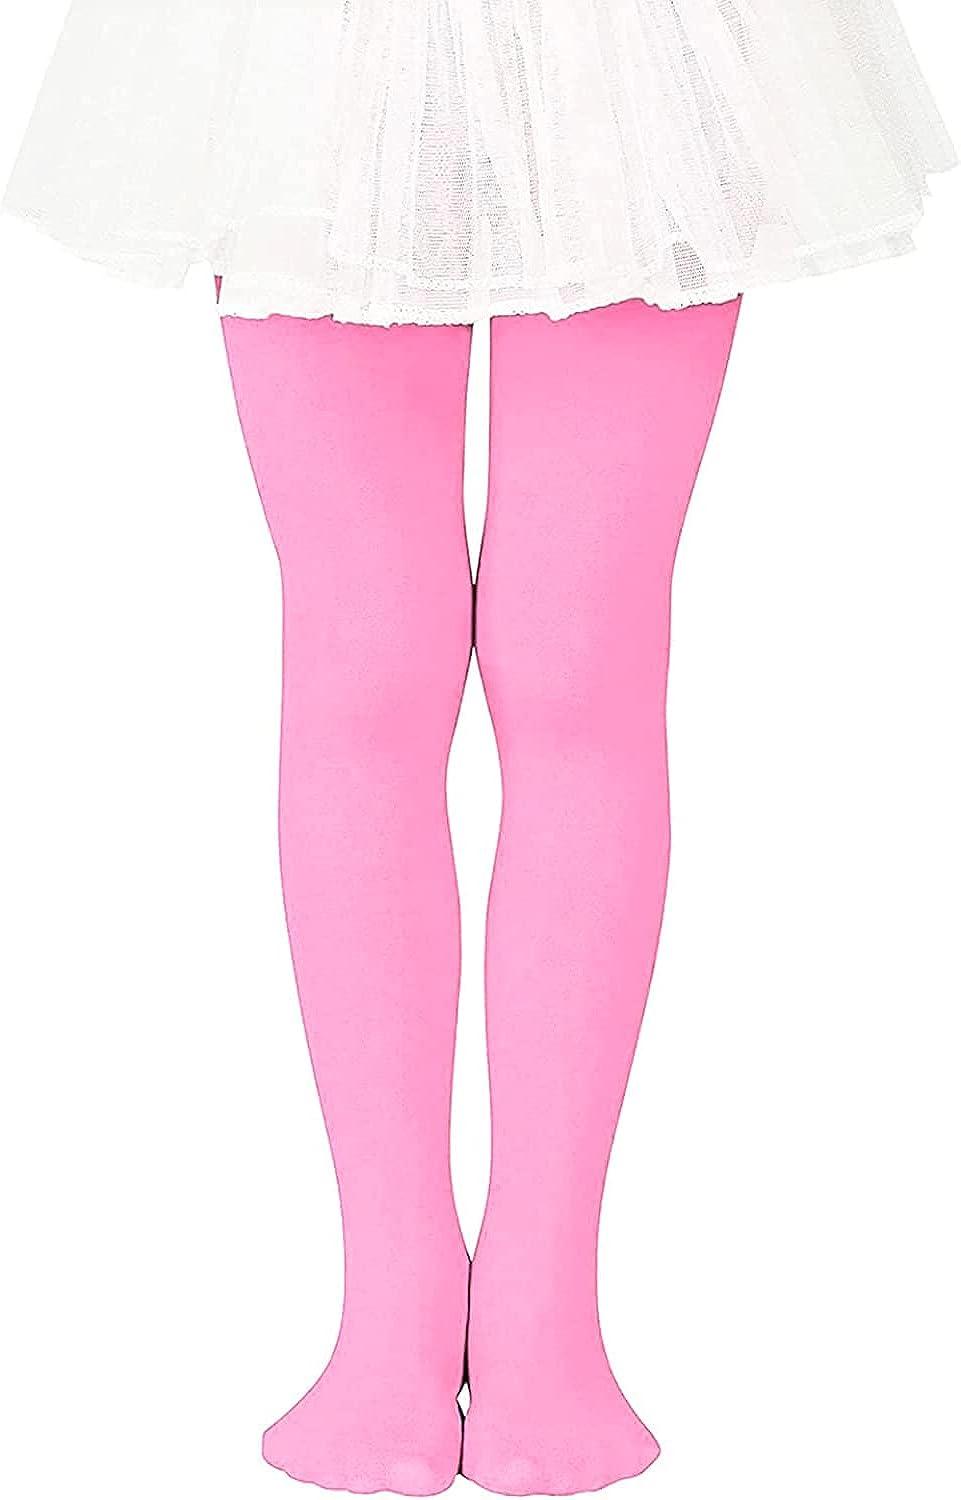  DIPUG Ballet Tights For Girls Dance Tights Toddler Thick  Soft Footed Kids Pink Stockings Size 8 9 10 11 12